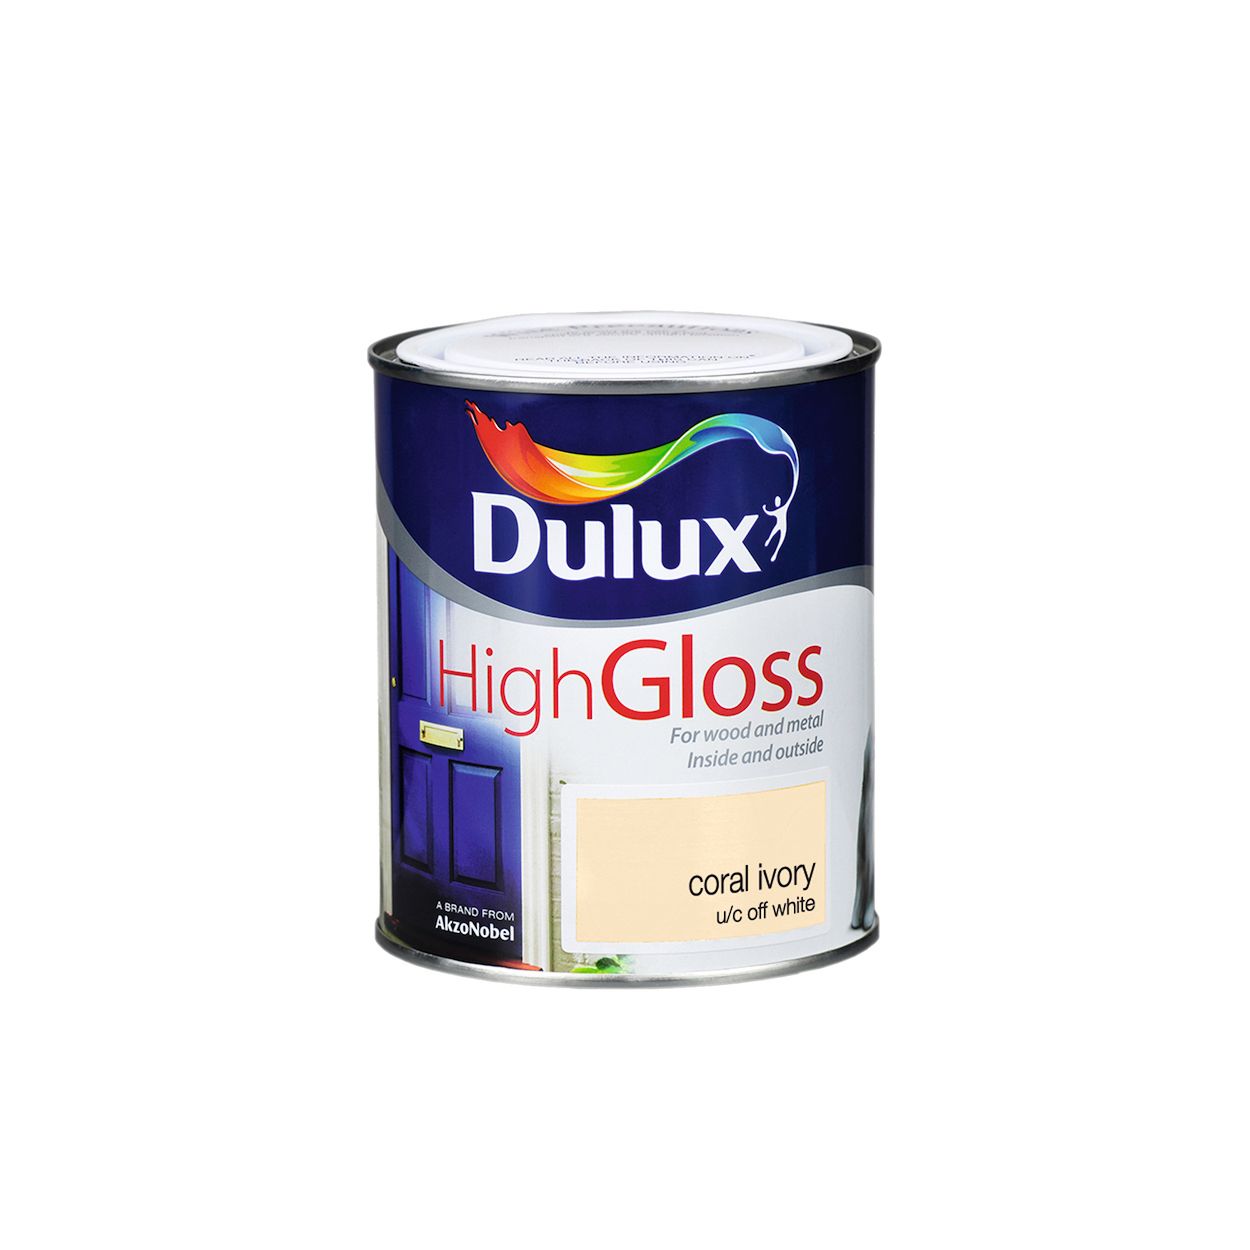 Dulux High Gloss - Coral Ivory